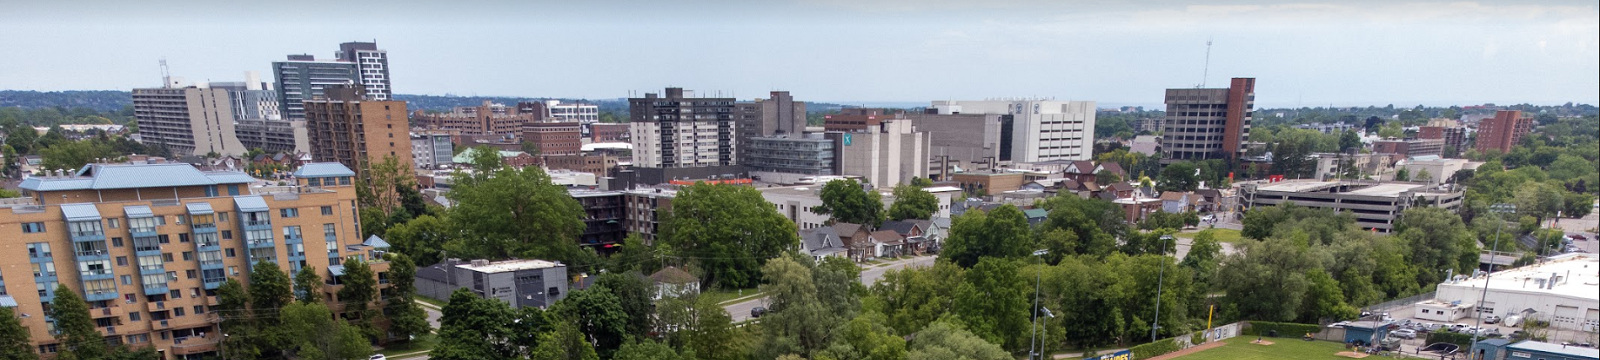 Rooftop view of downtown Oshawa